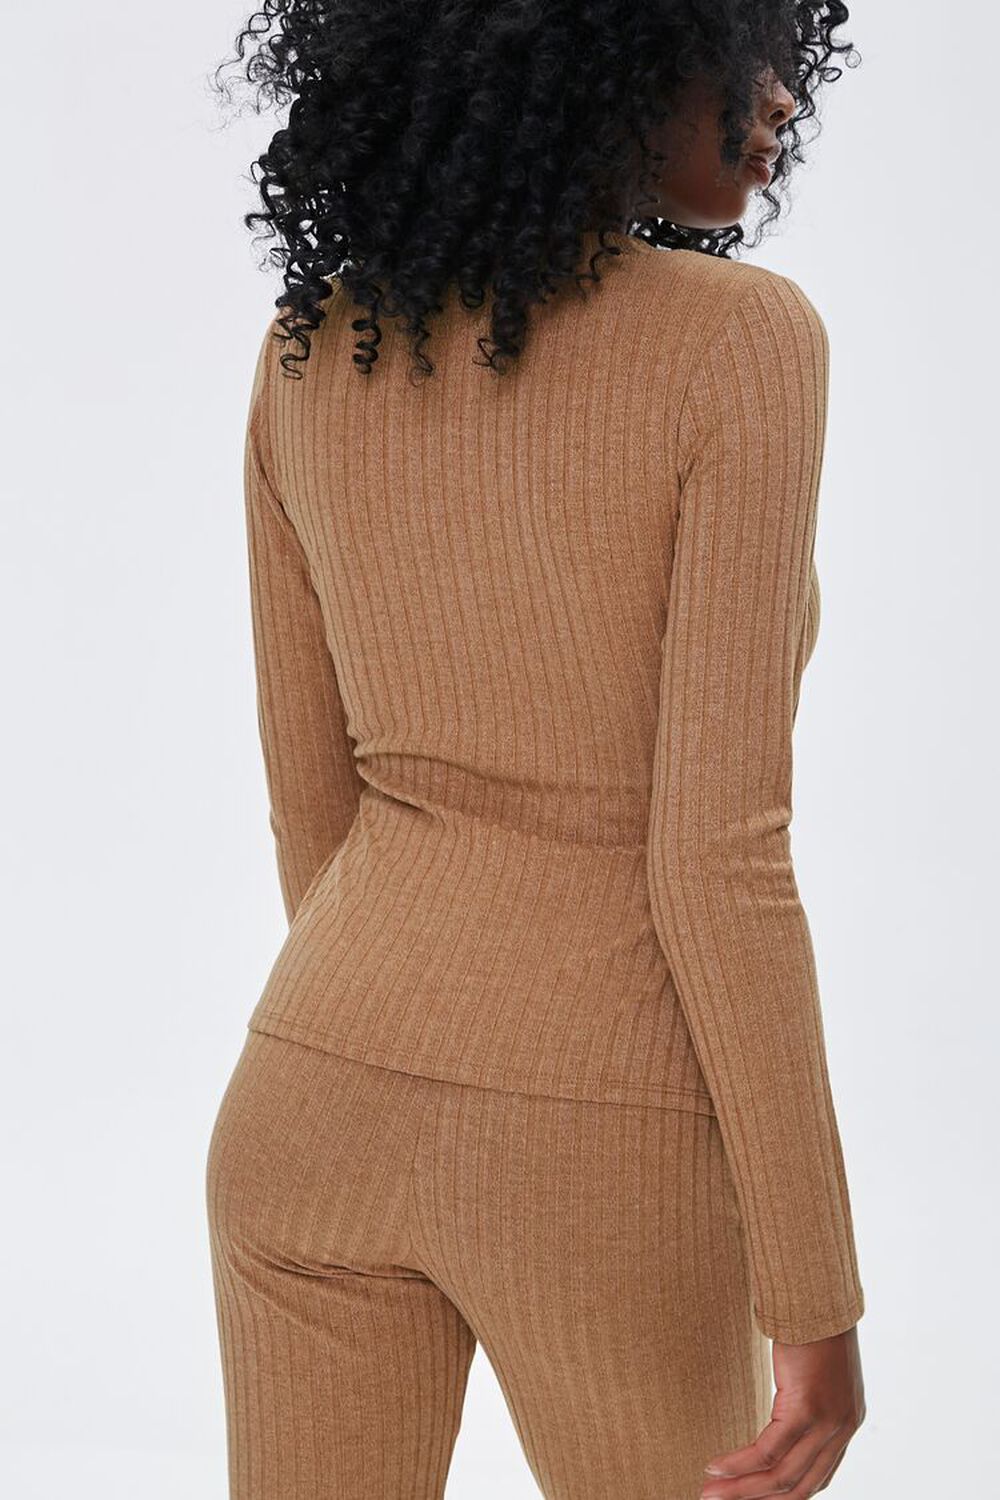 CAMEL Ribbed Crossover Top, image 3